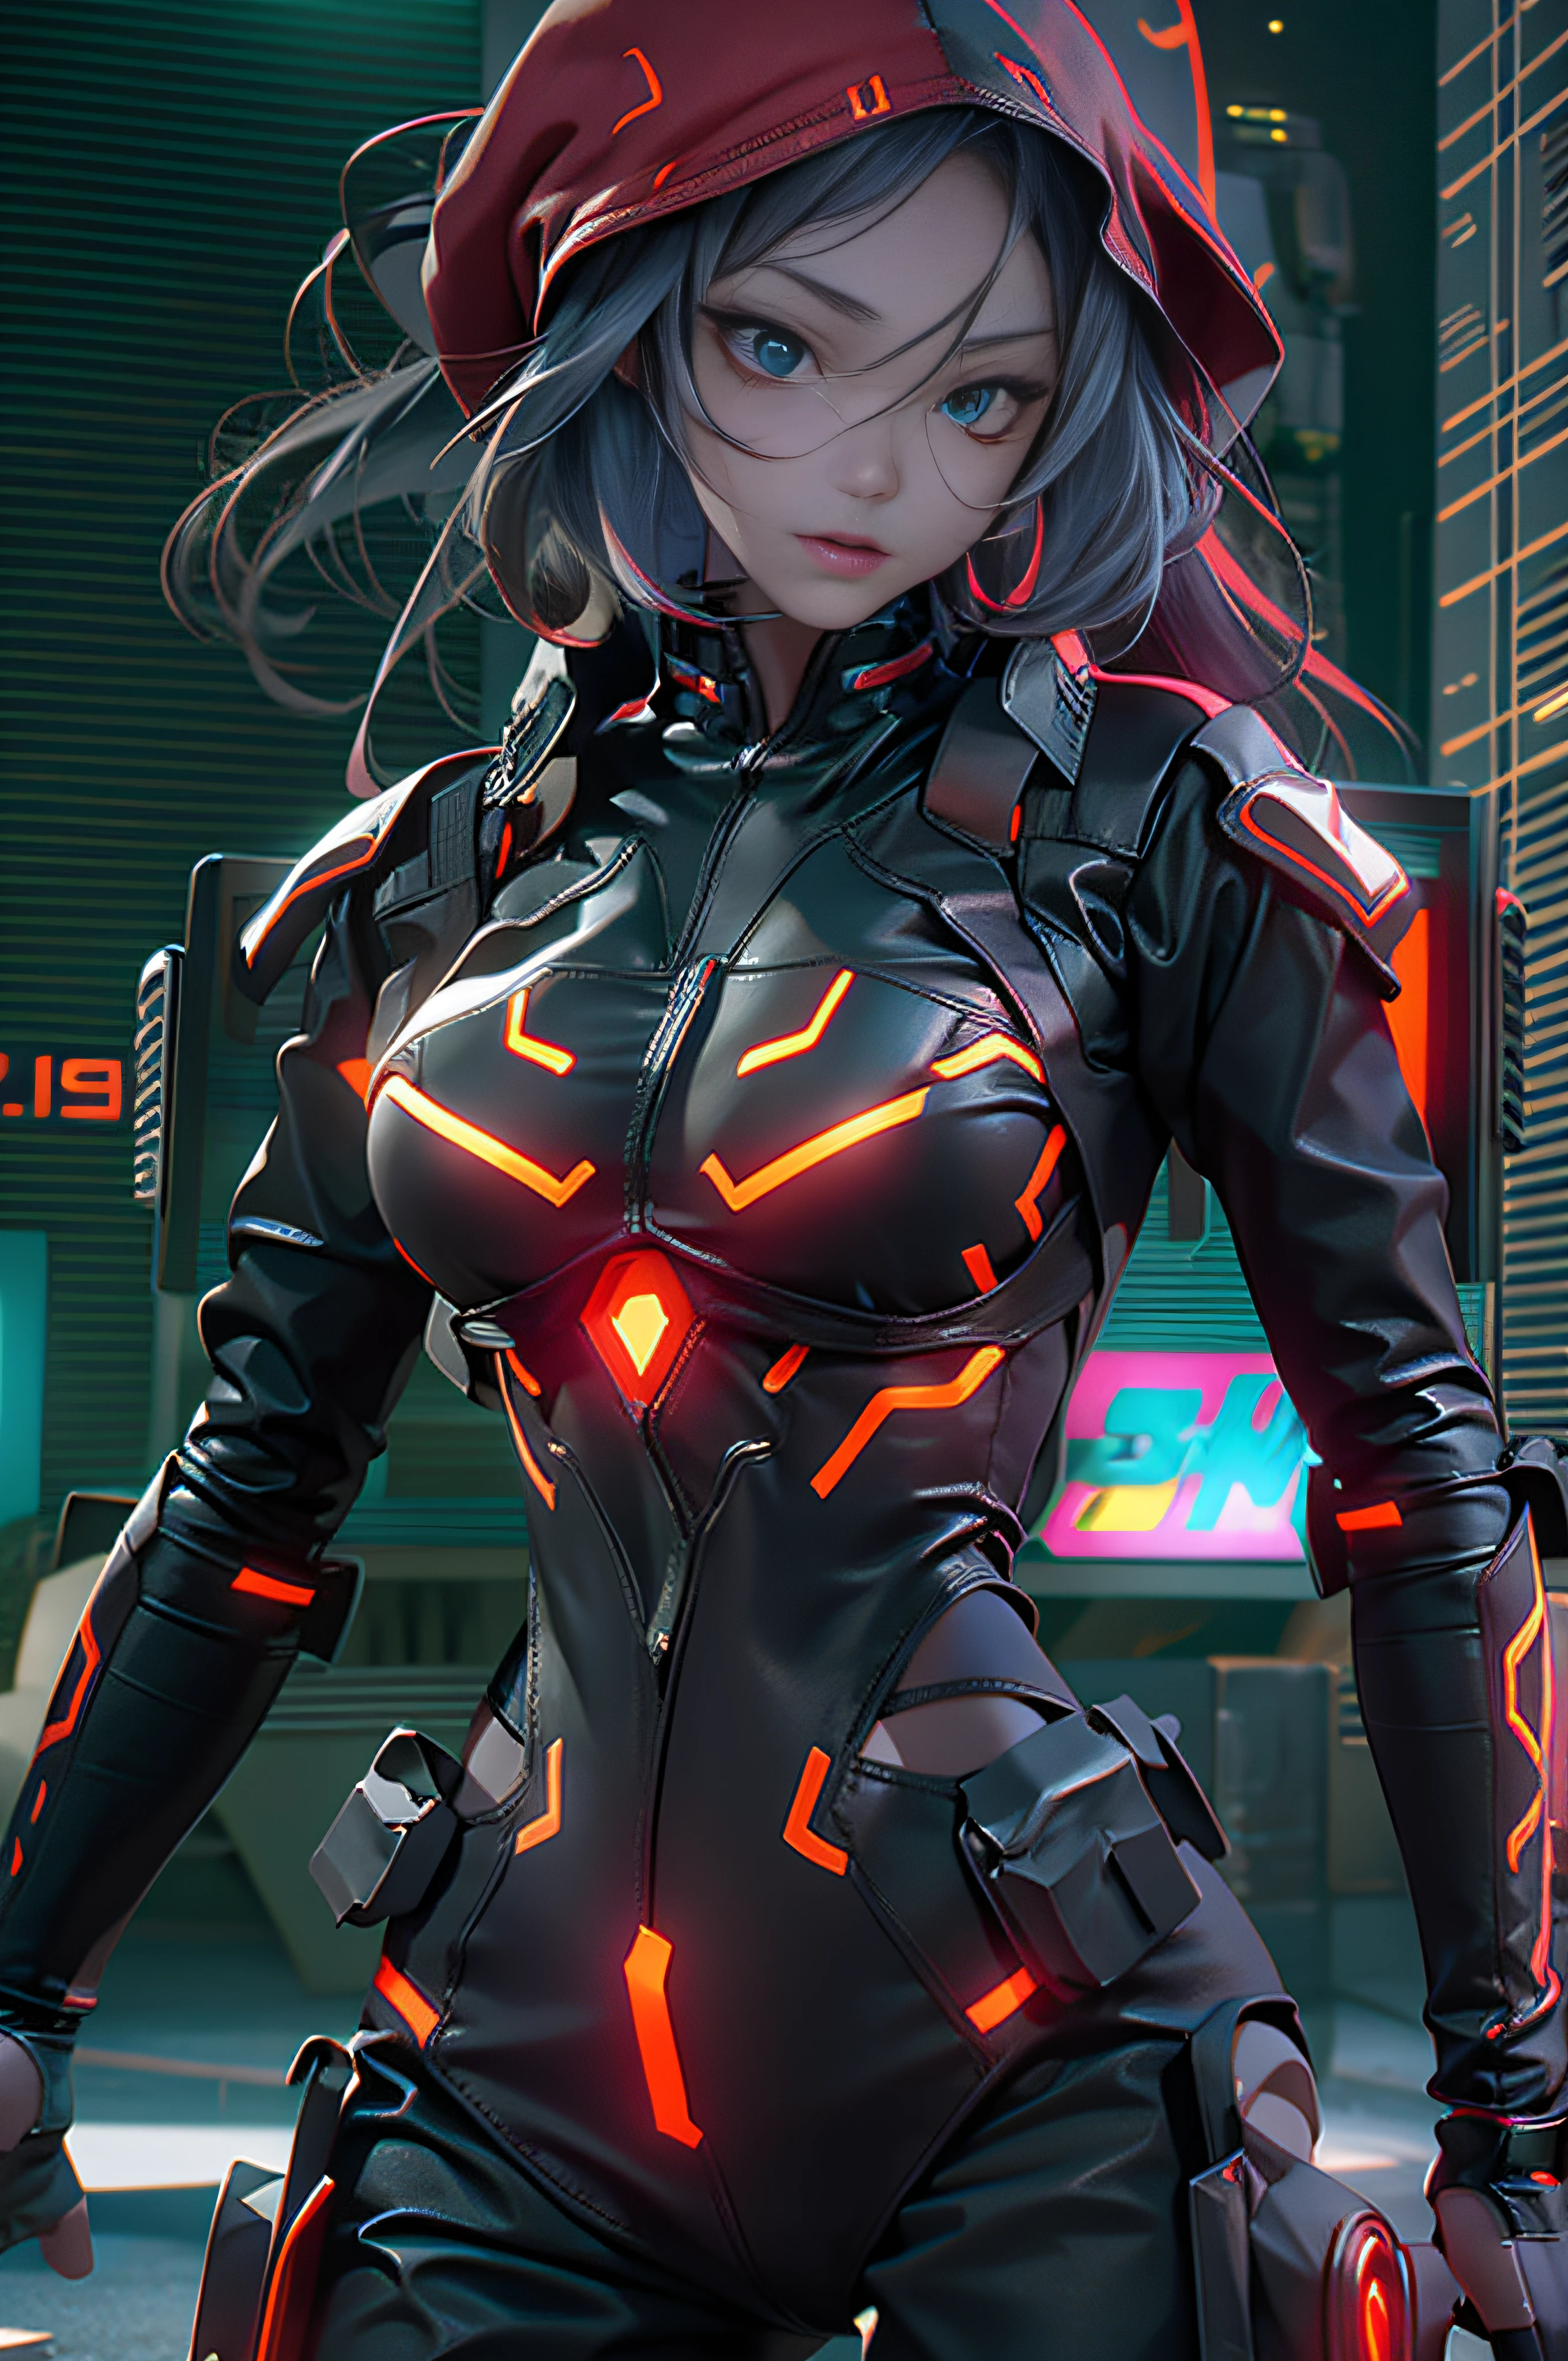 Muscle Special Forces Girl，radiant eyes,  Wearing black special forces equipment, Gun in hand, full body Esbian, Shoot at knee level, Cyberpunk, neon light, Futuristic, surrealist, Red，。.3D, redshift, Maxon Cinema 4D, Quaixel Megascan Rendering, Doomsday color, Red light, Futuristic, 1/3, high detailing, Ultra High Quality, Illusion Engine, 8K,